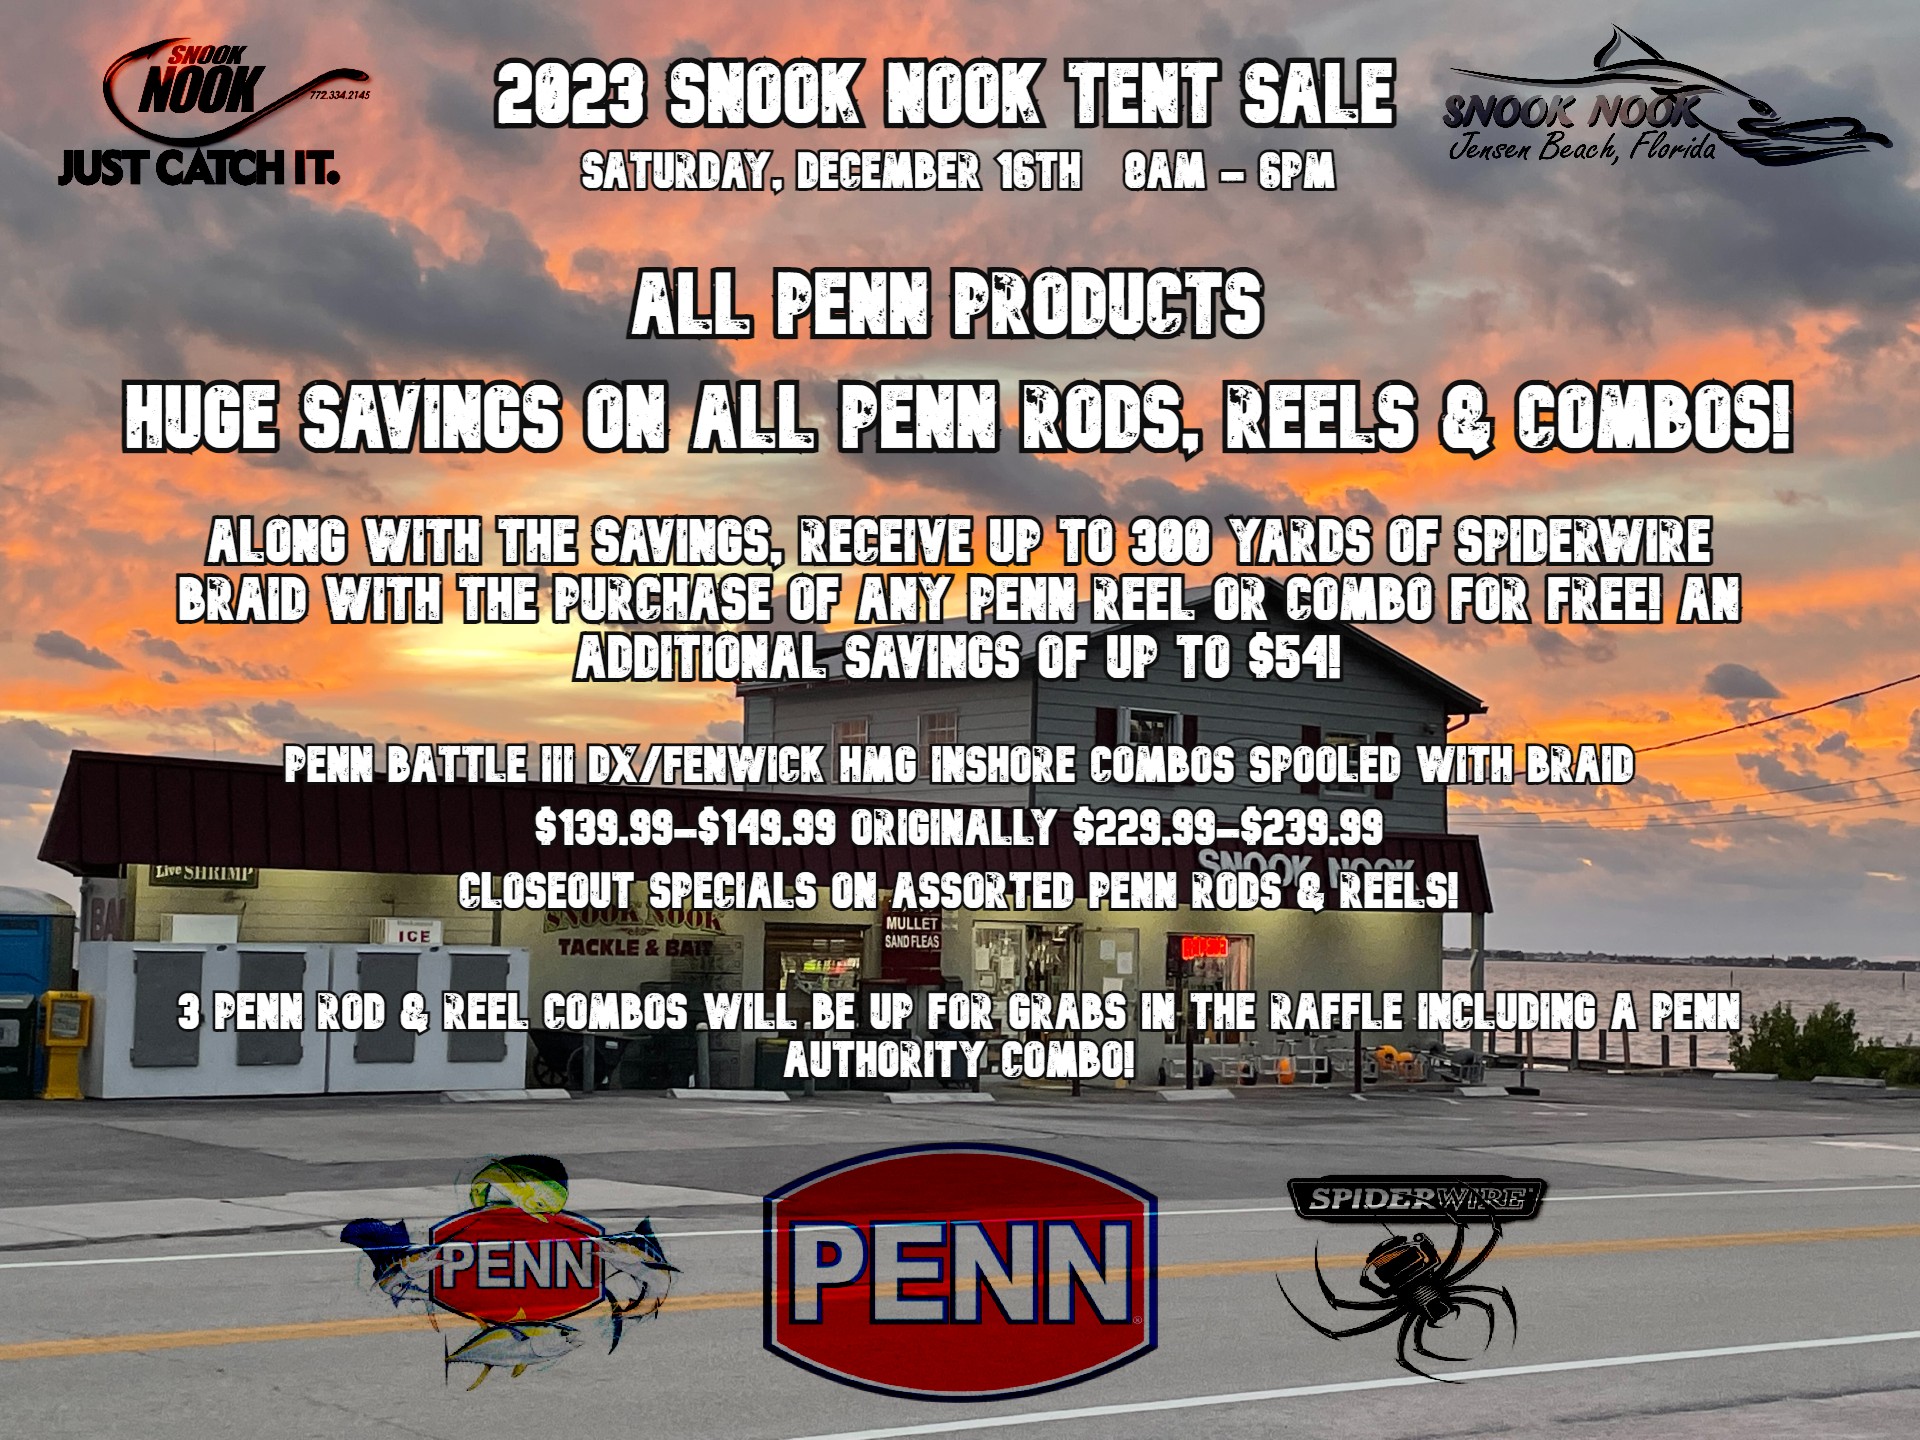 2023 Snook Nook Tent Sale – Penn Products